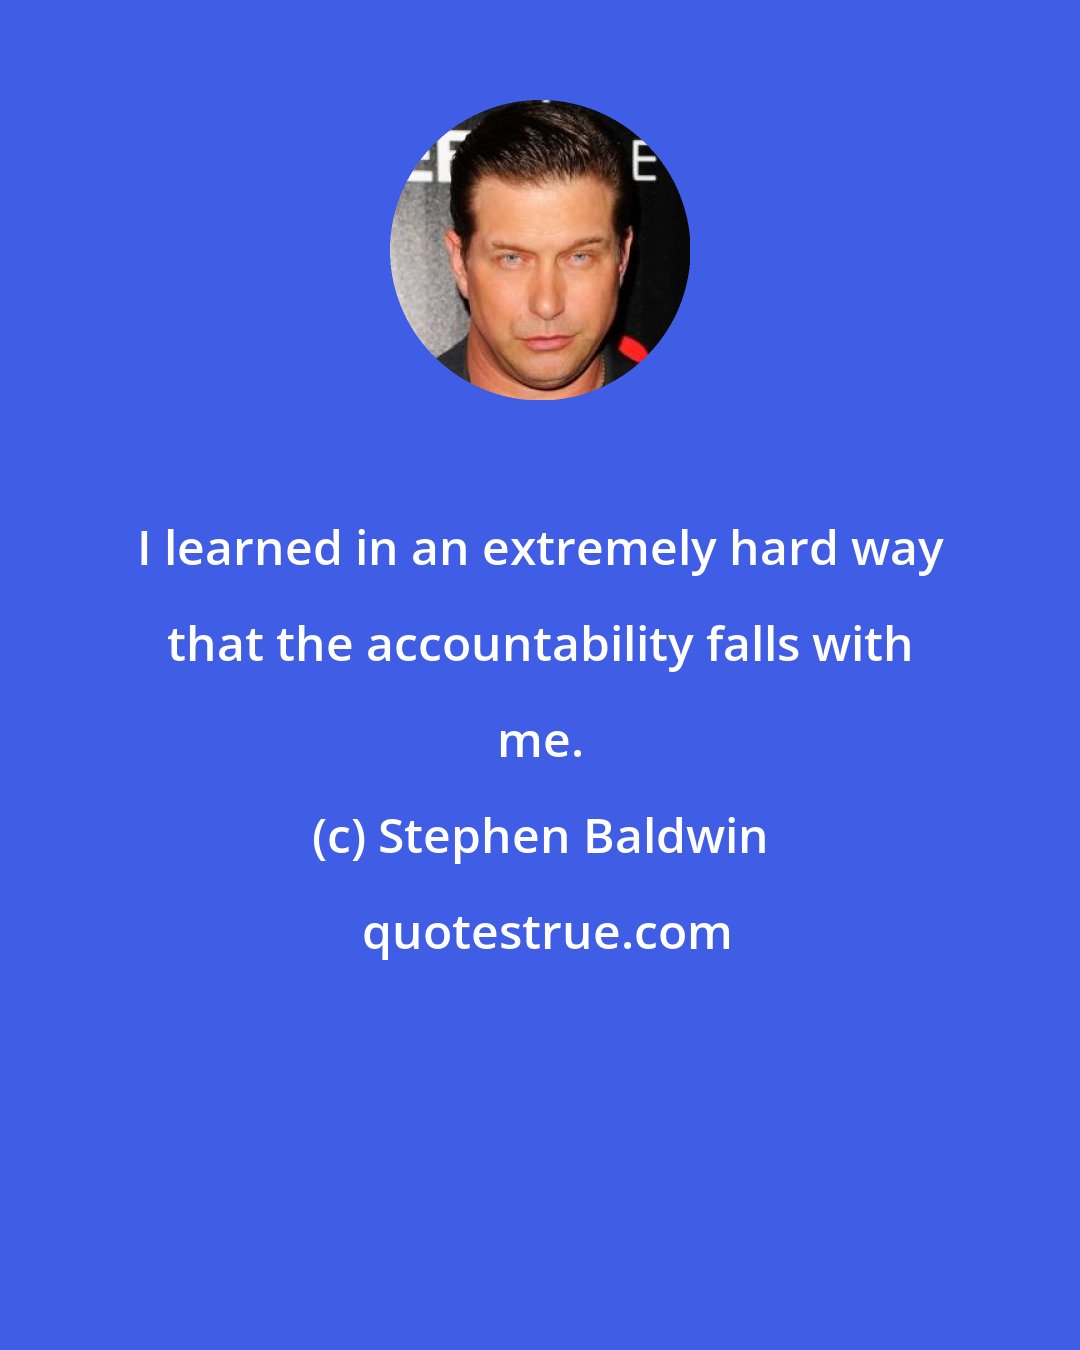 Stephen Baldwin: I learned in an extremely hard way that the accountability falls with me.